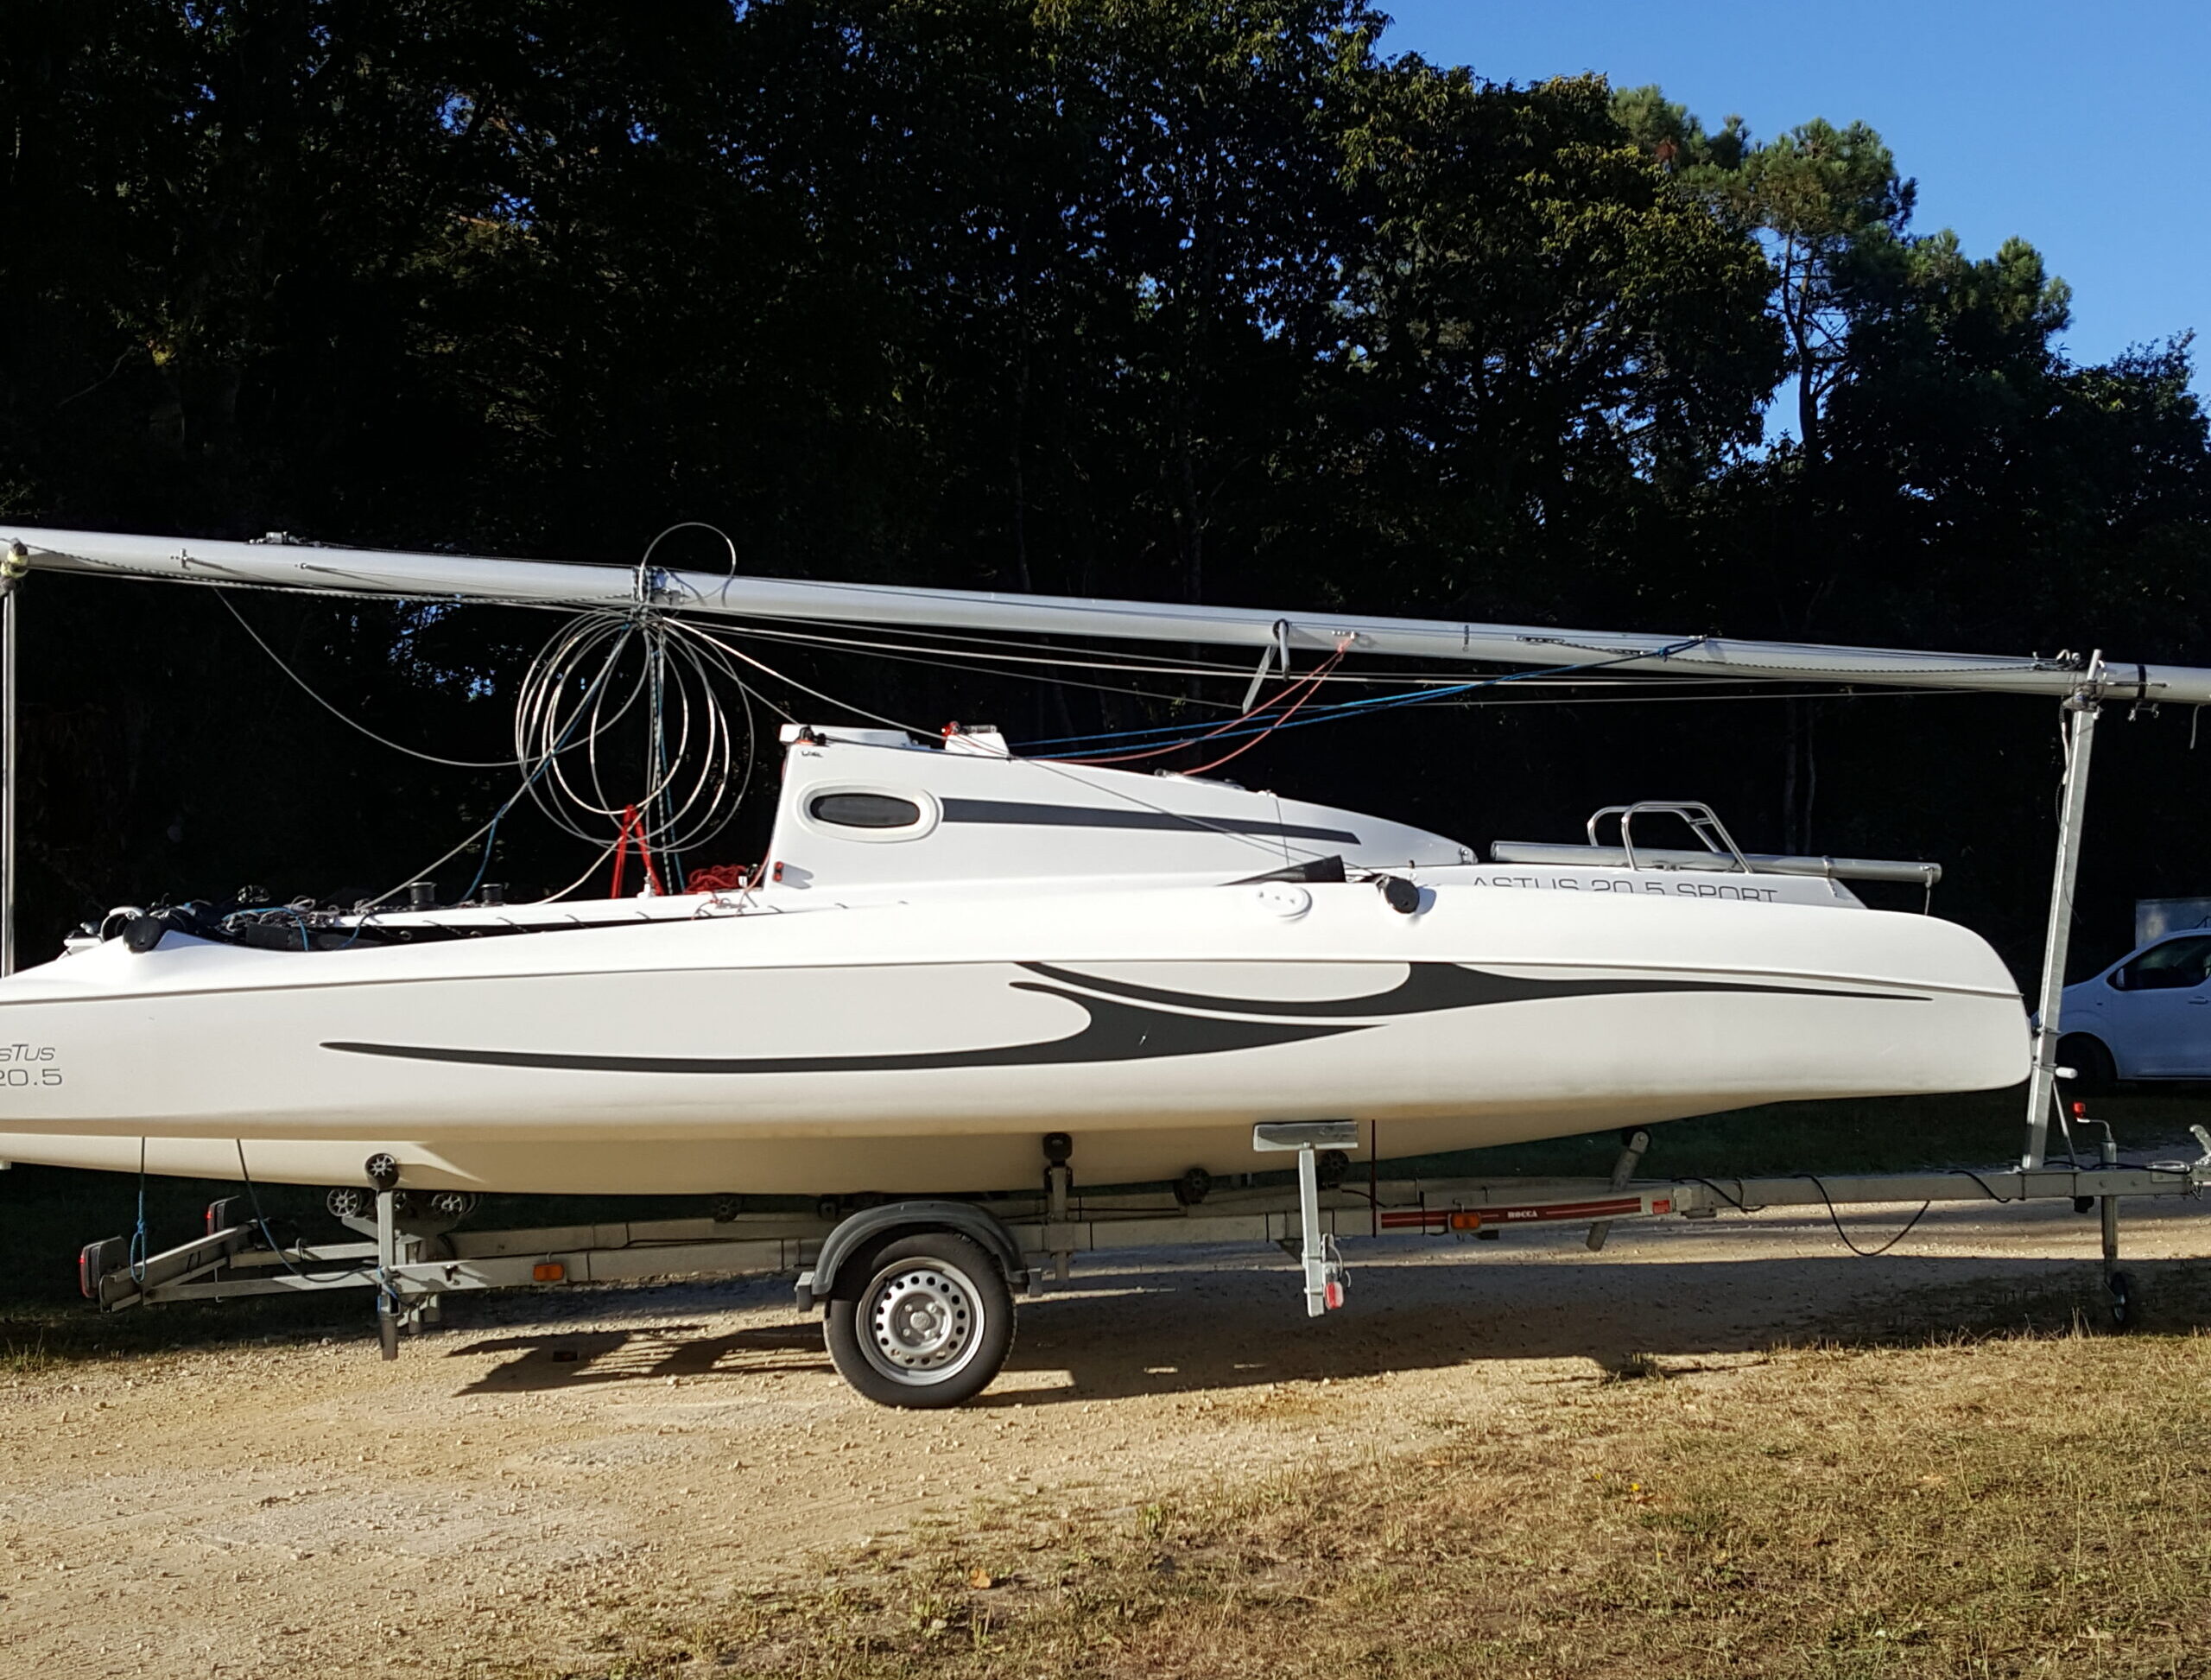 The Astus 20.5's telescopic floats and low weight makes it easy to tow